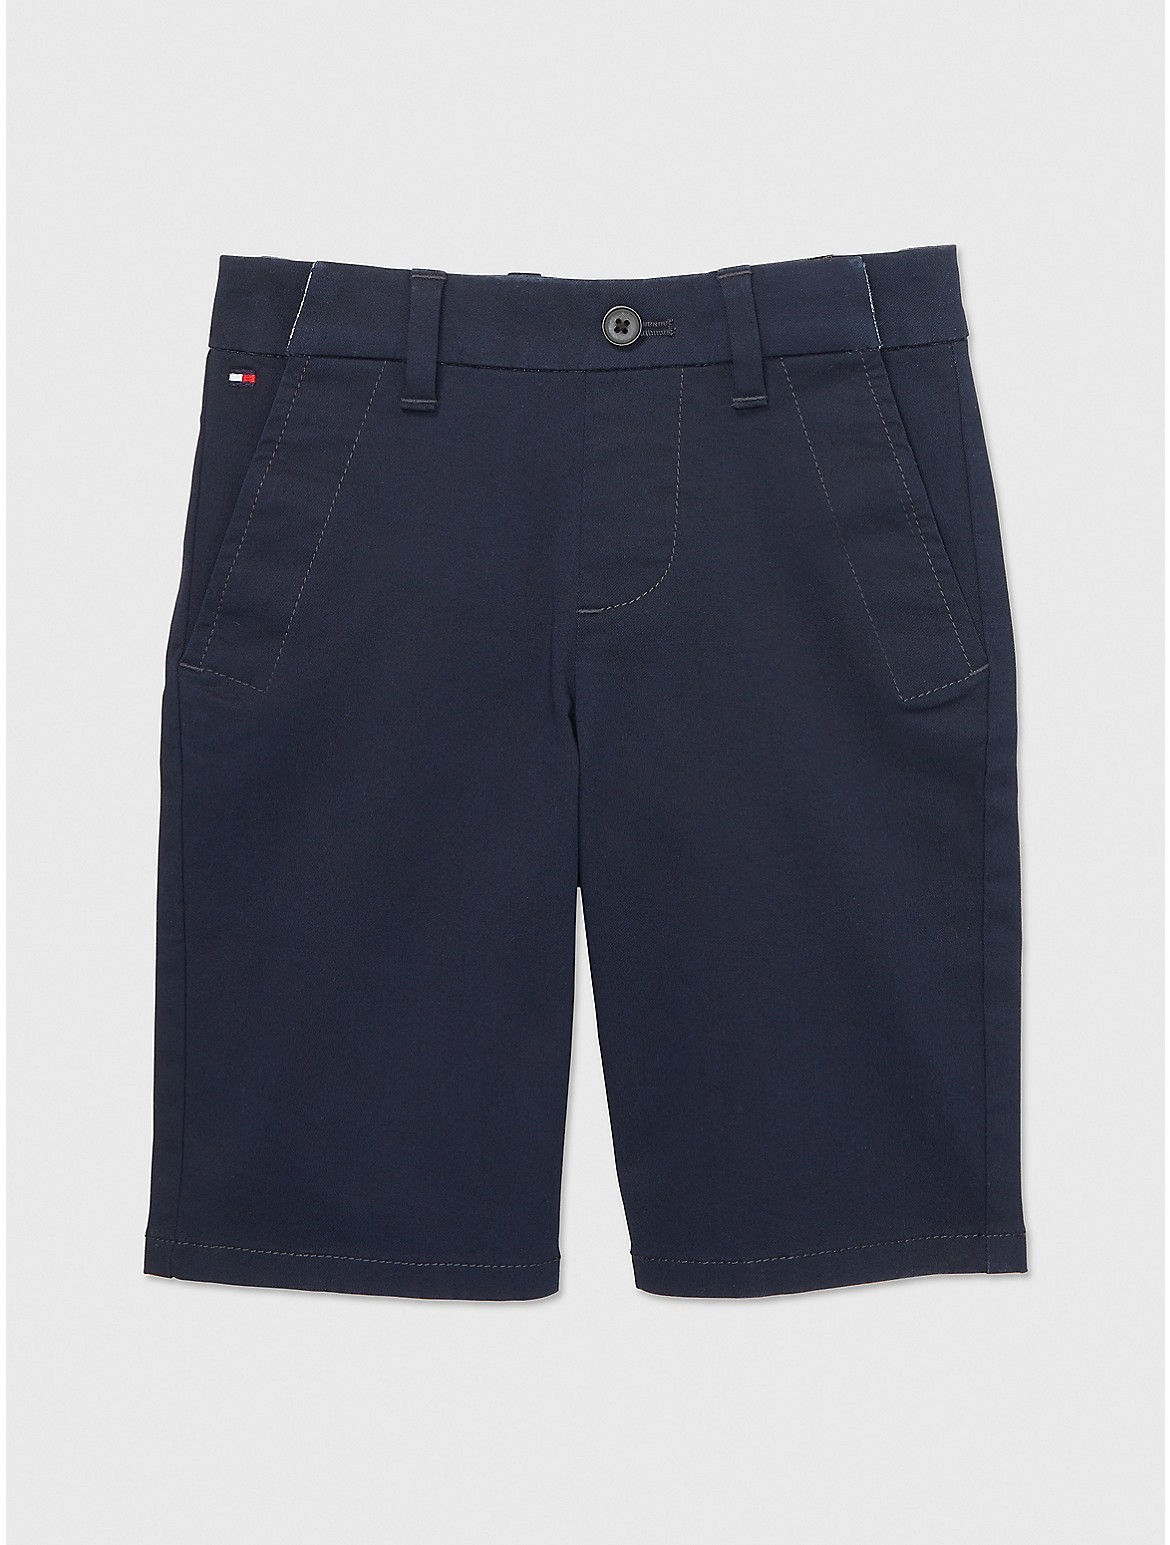 Tommy Hilfiger Boys' Seated Fit Chino Short - Blue - 6